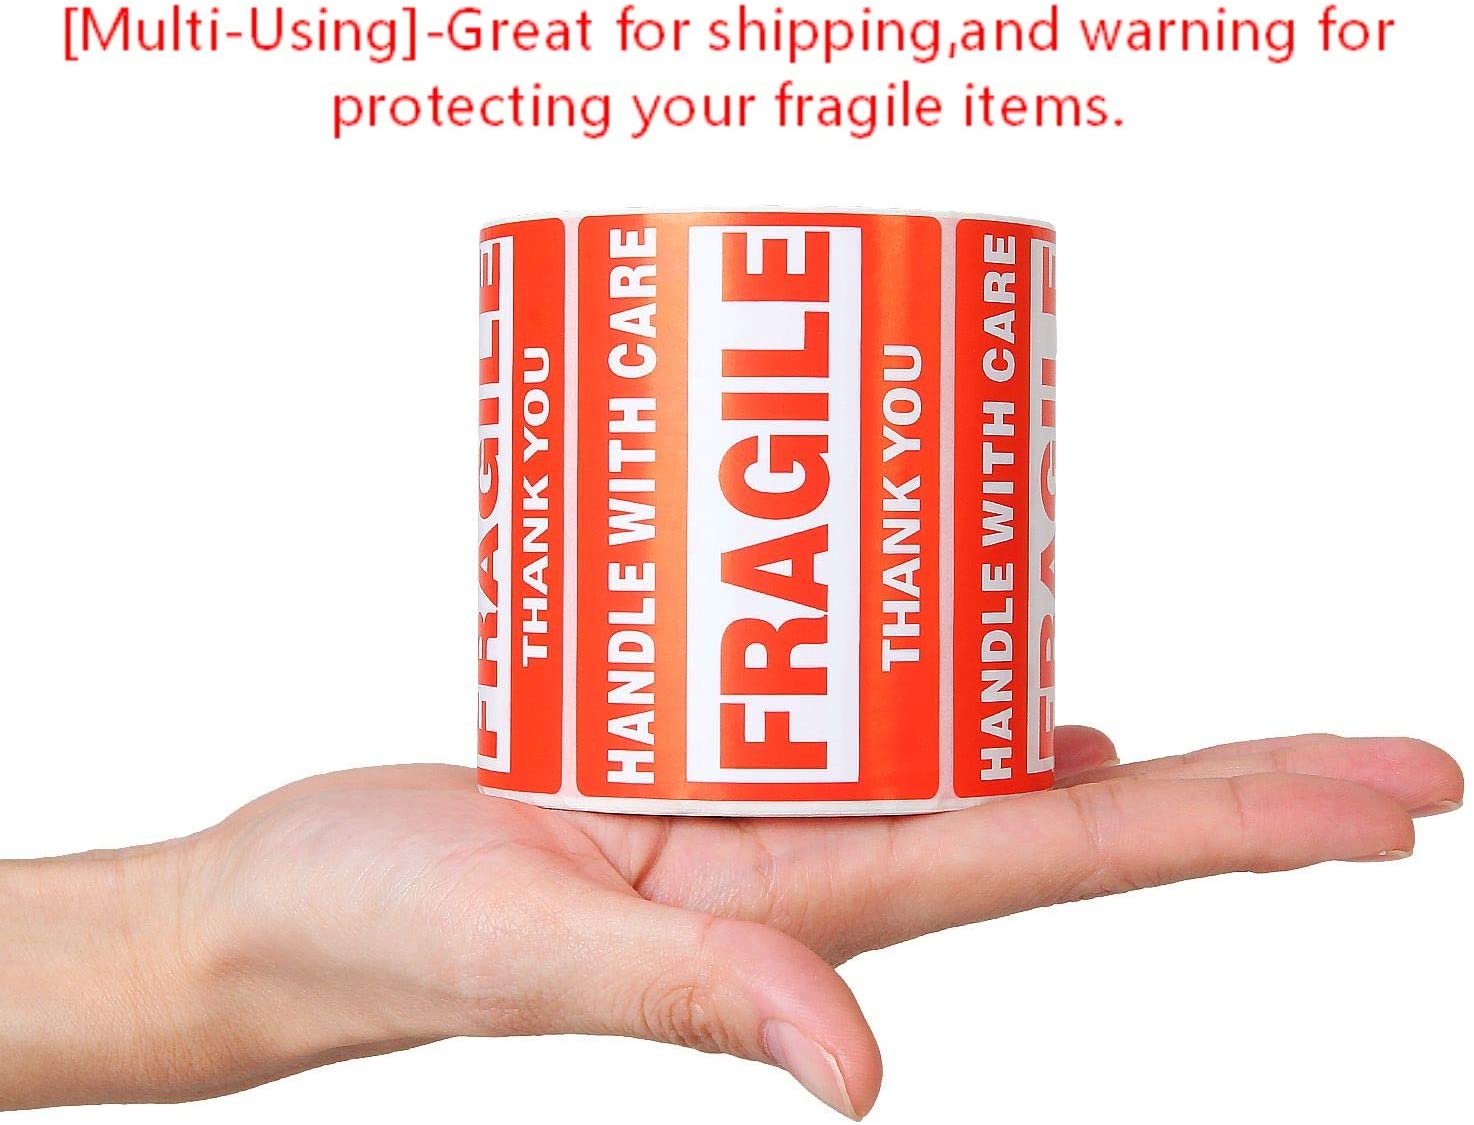 1 Roll 500 2" x 3" Inches FRAGILE HANDLE WITH CARE THANK YOU Stickers Labels